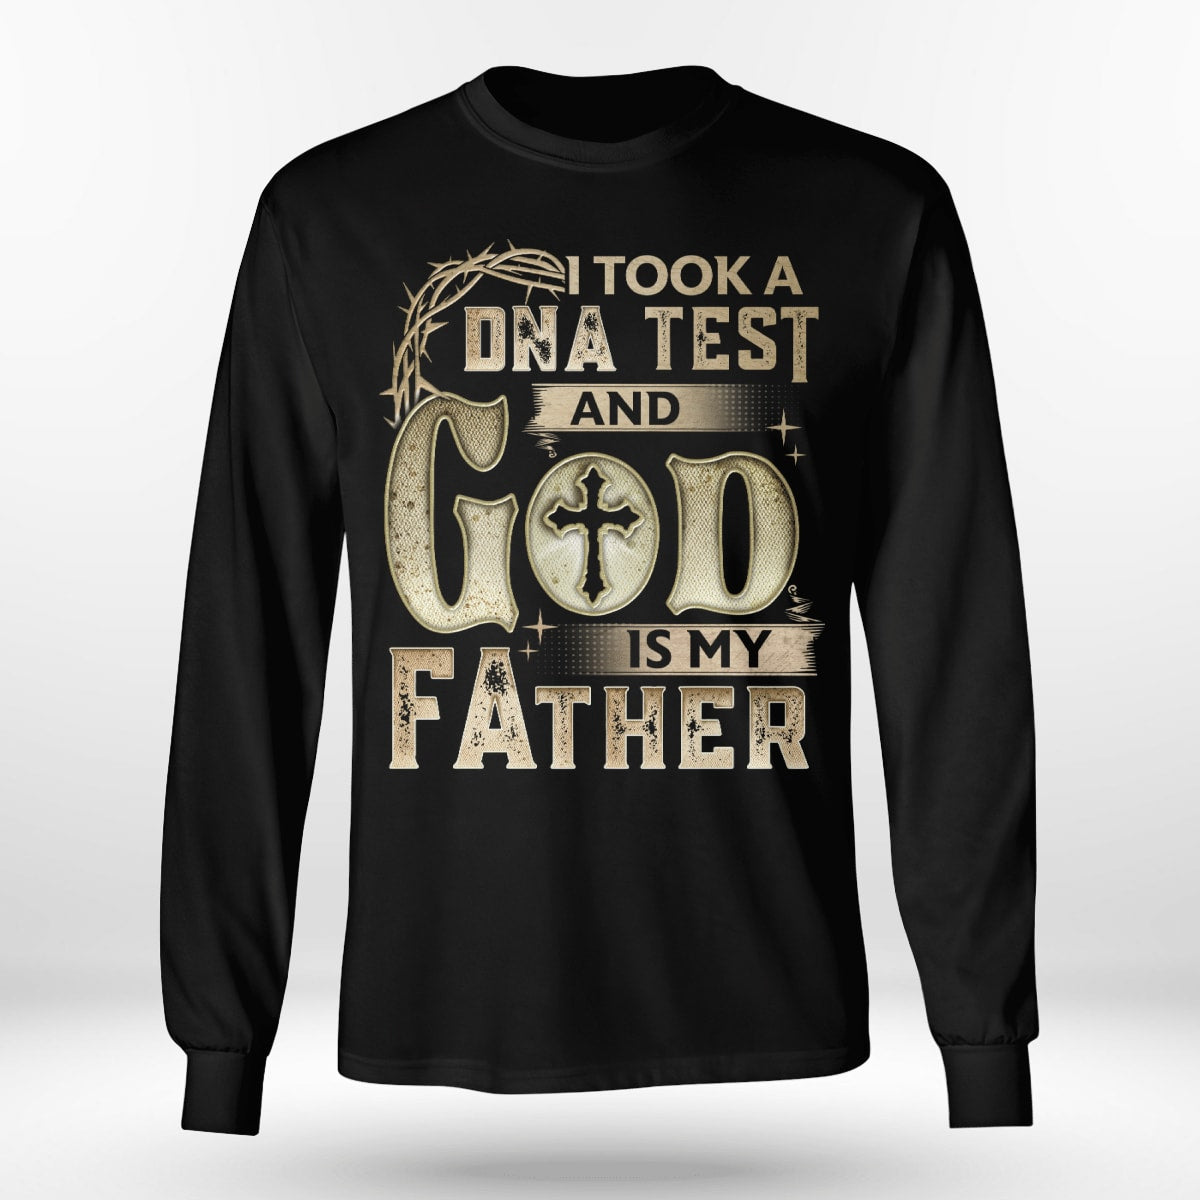 I Took A Dna Test And God Is My Father, Christian T-Shirt, Religious T-Shirt, Jesus Sweatshirt Hoodie, Faith T-Shirt